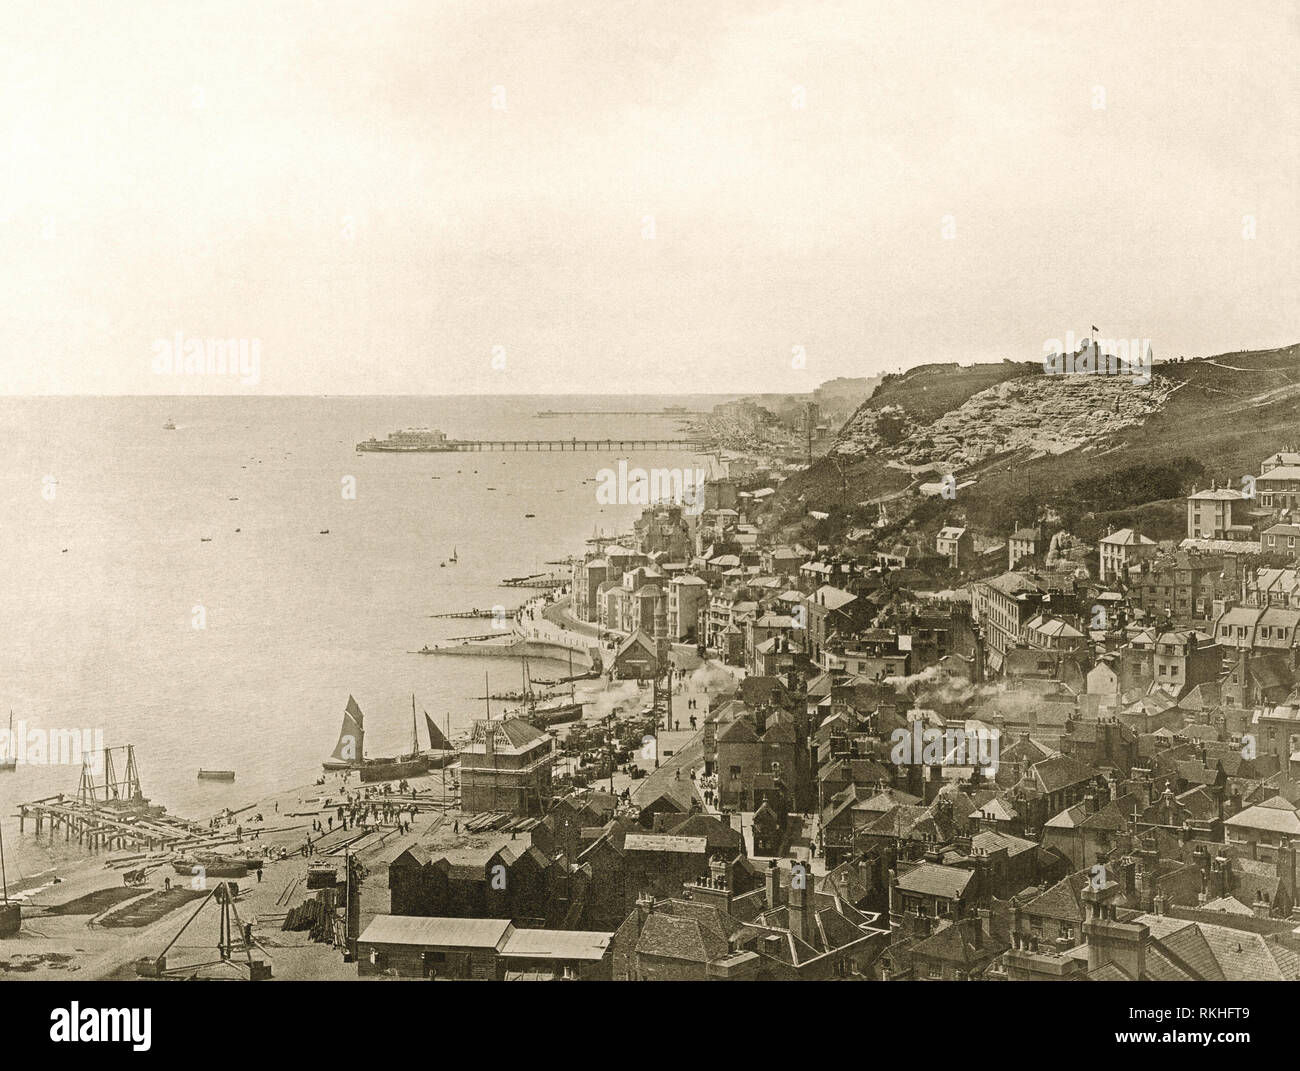 Looking west along the sea front at Hastings, East Sussex, England in the Victorian era, c.1900. In the foreground is the Old Town and both Hastings and St Leonards piers are visible in the background. The shingle beach to the left is The Stade, home to its beach-launched fishing fleet. The distinctive tall, black huts (bottom centre) were used to house the nets for catching the mackerel and herring. Stock Photo